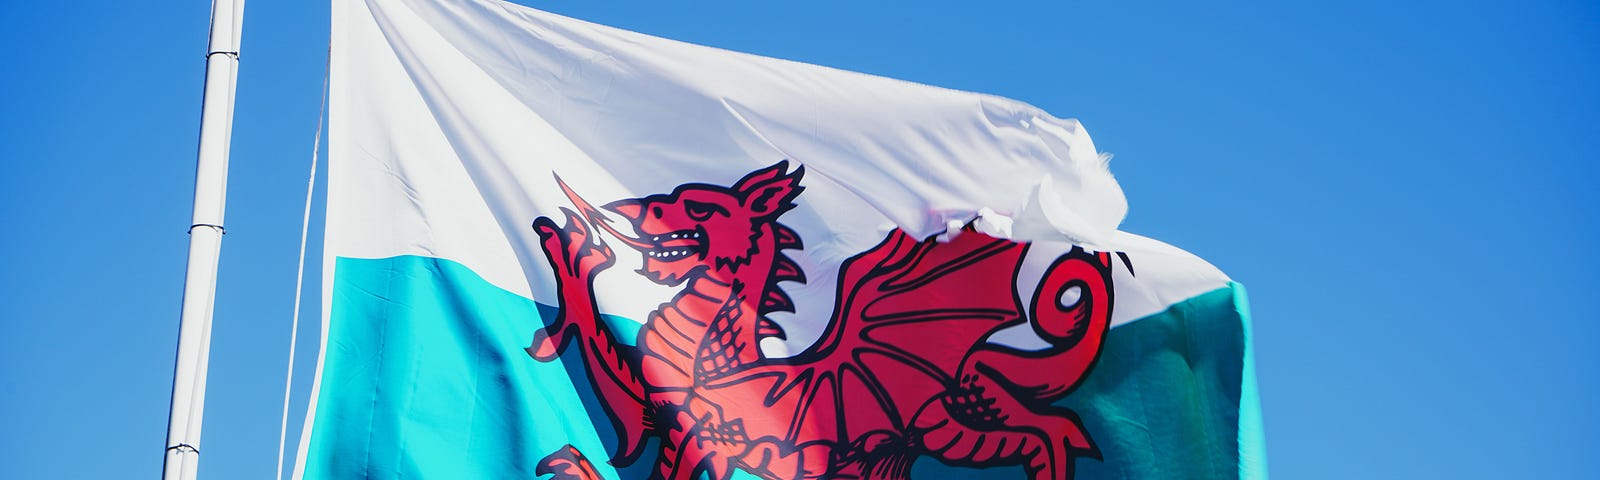 Welsh national flag: red dragon against a white sky and green ground. We win flags.